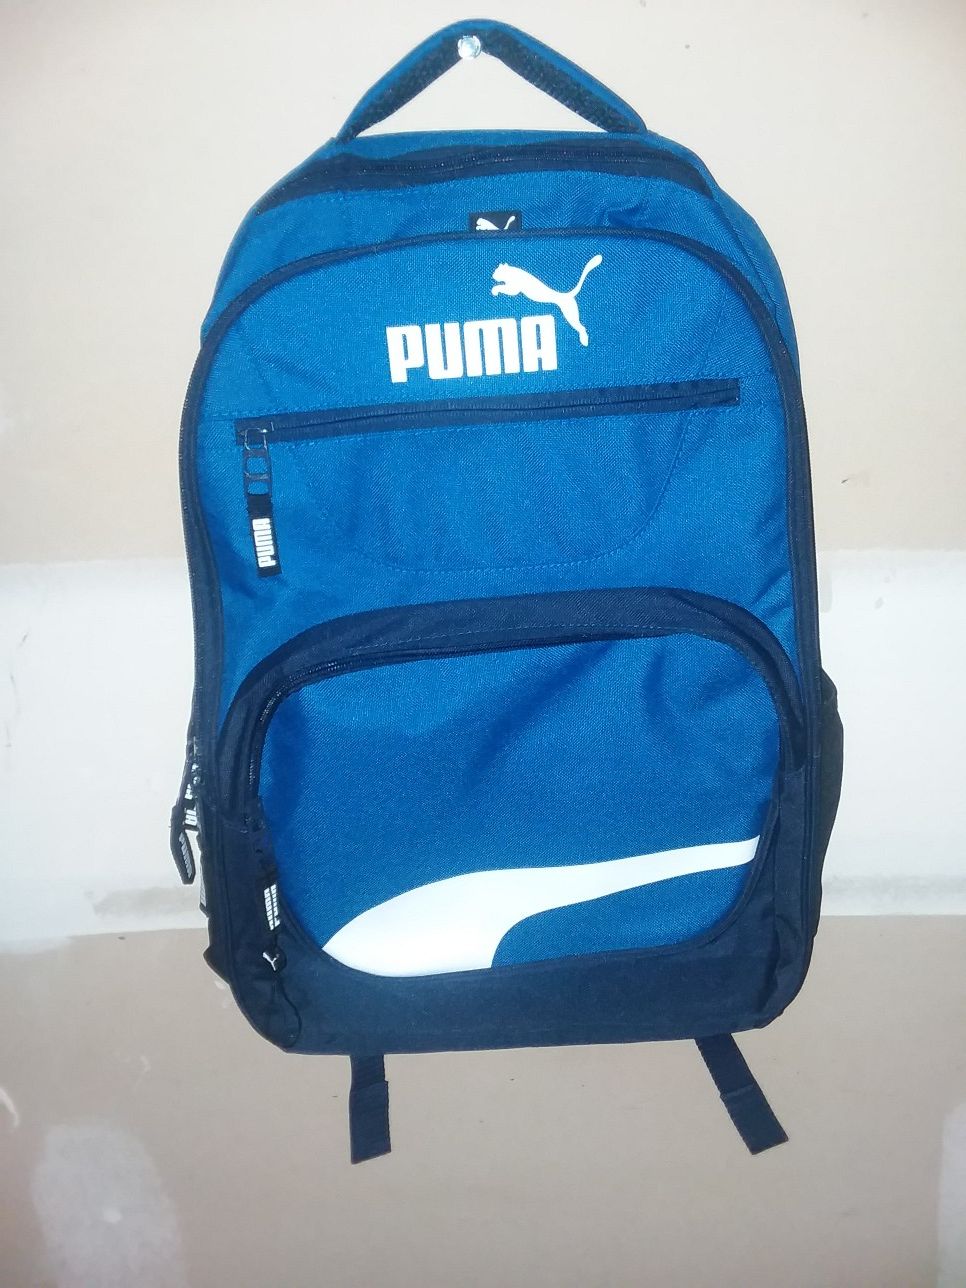 FREE SHIPPING - Puma Blue/Black/White Squad Laptop Backpack - New Without Tags